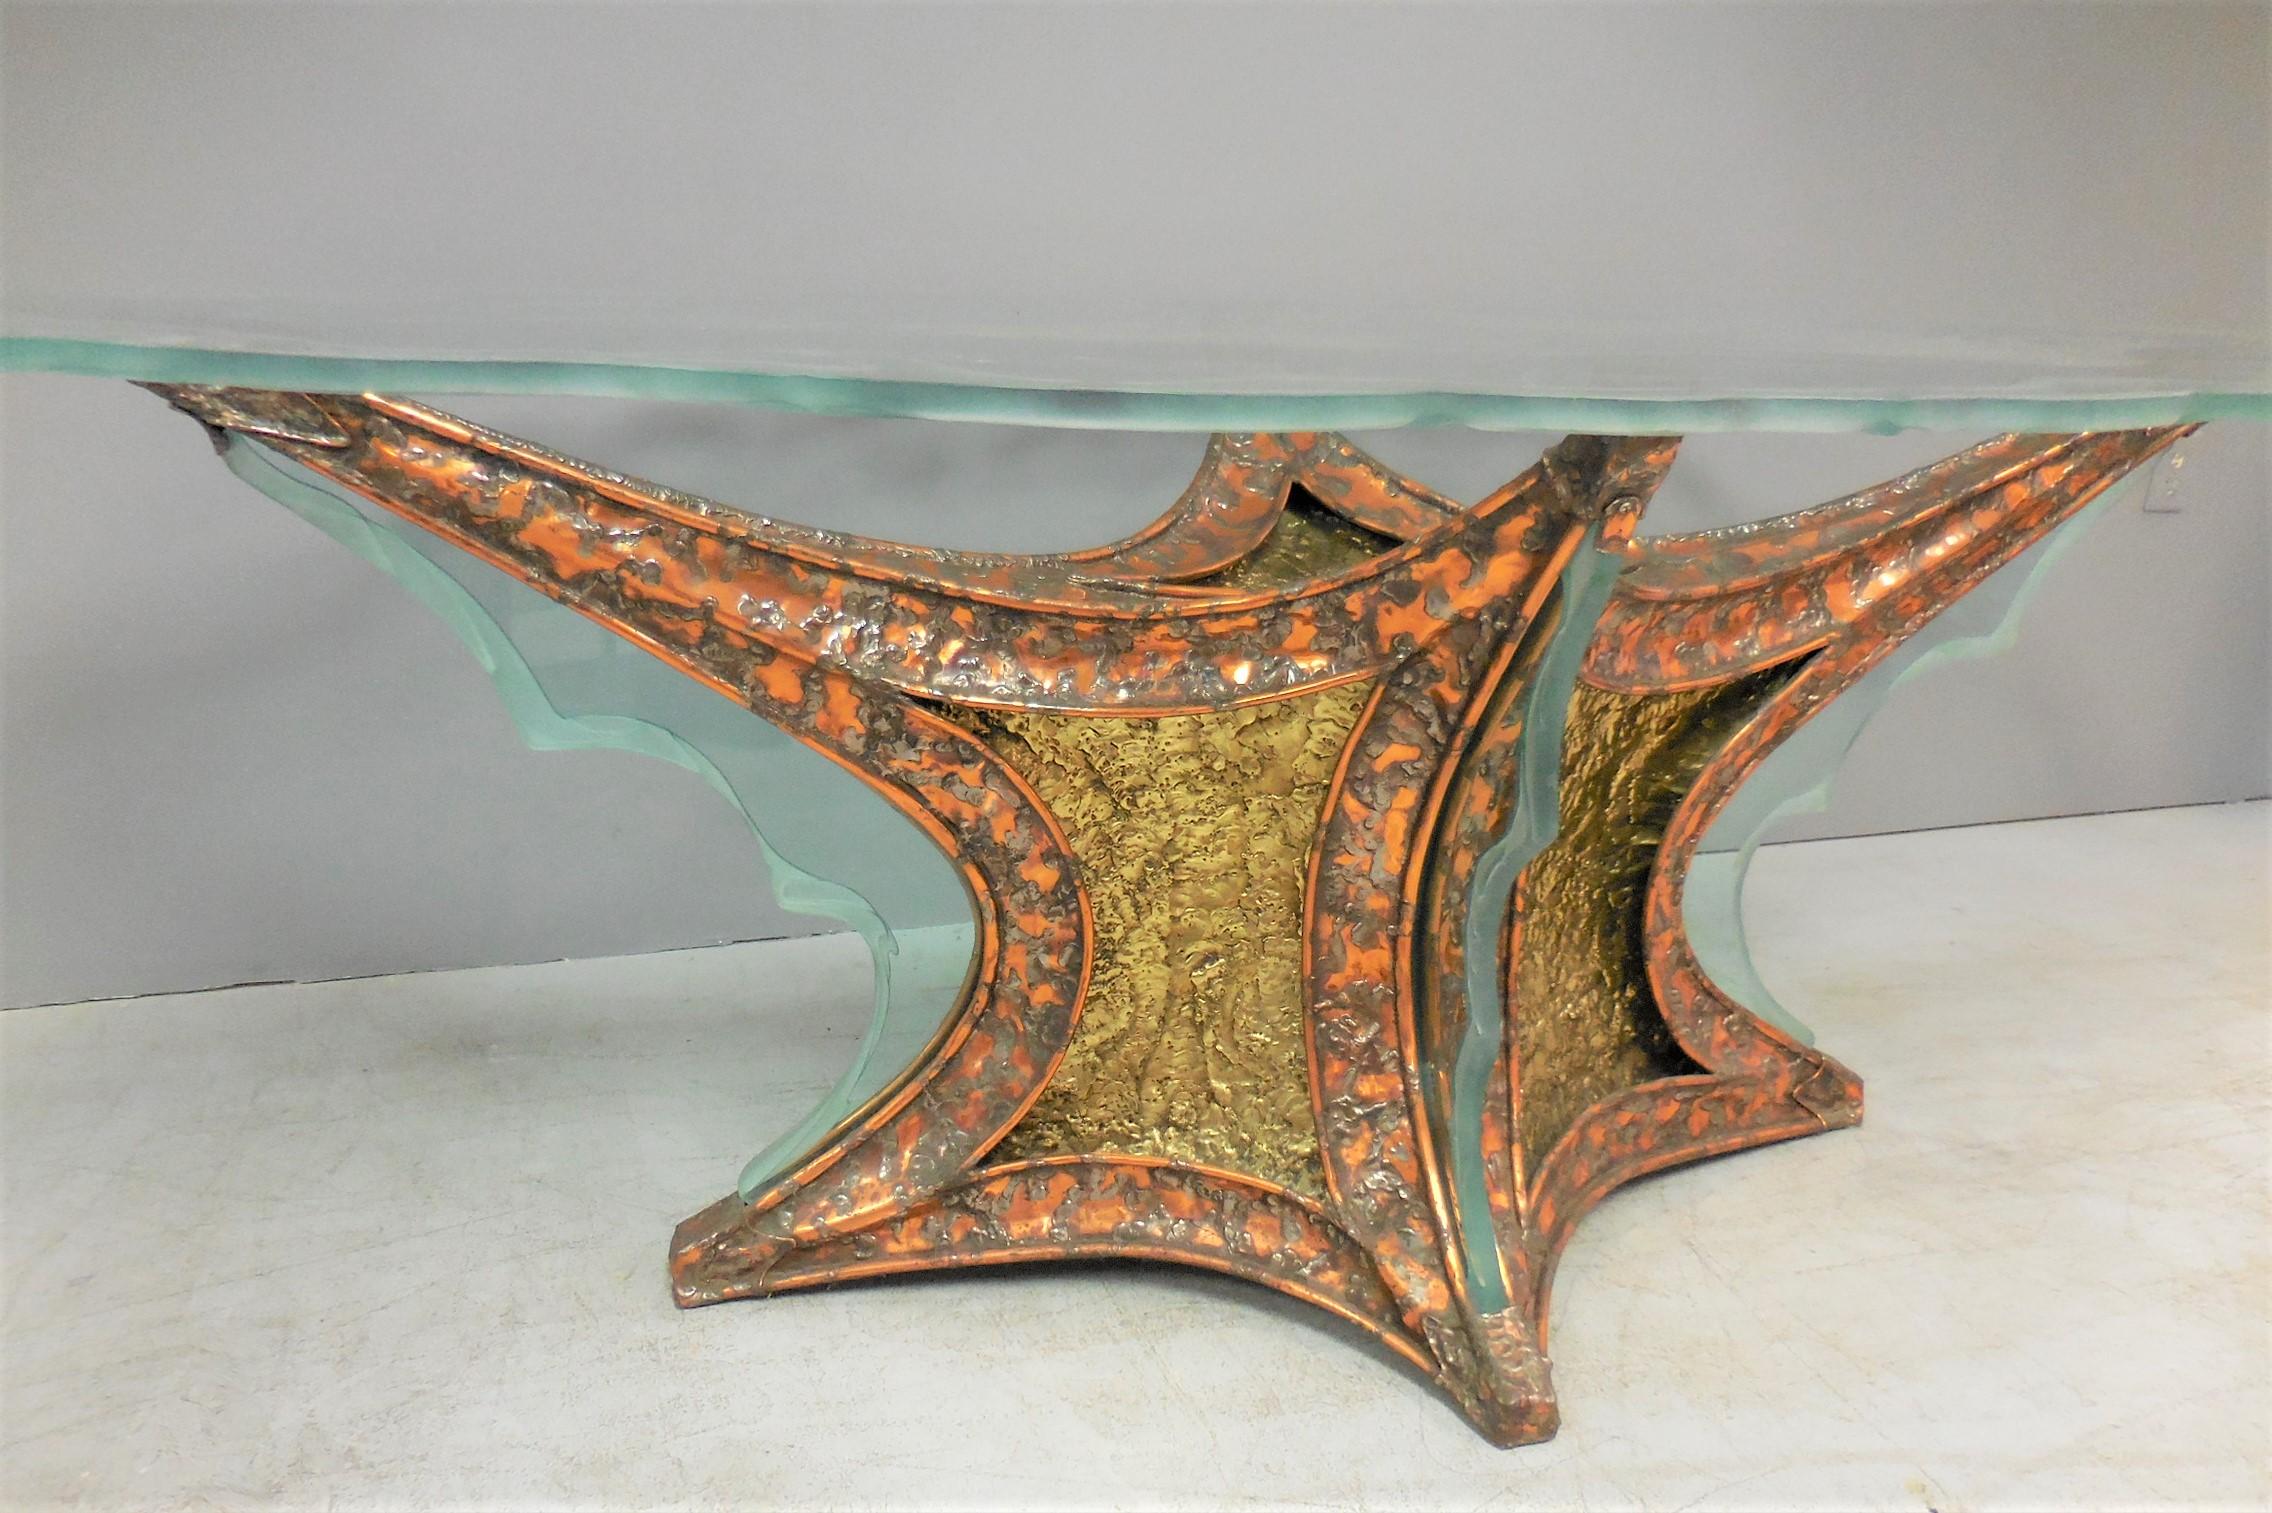 A large bronze base with etched glass insets, the custom glass top is also etched. A very unique table to say the least.